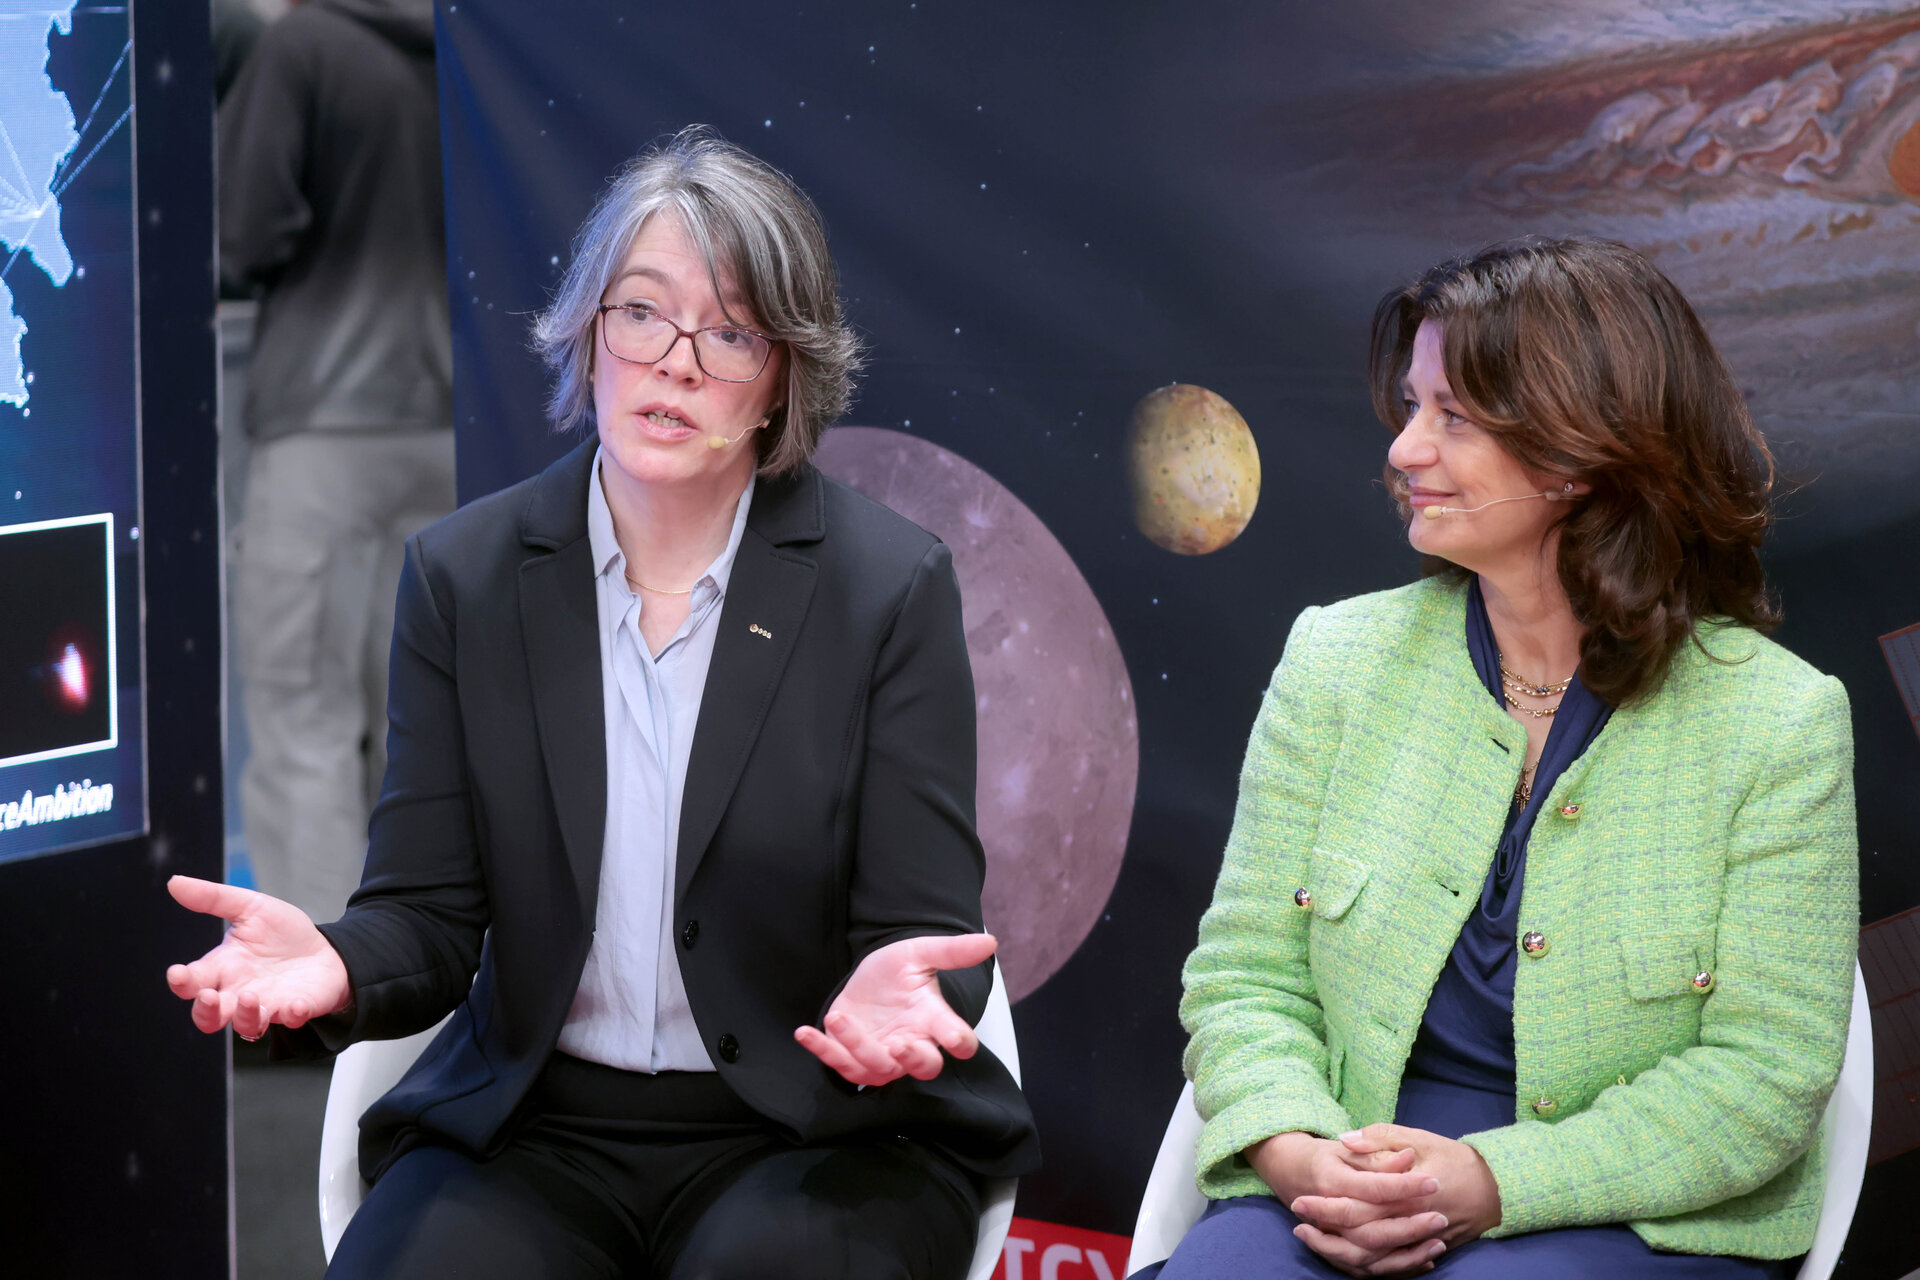 Elsa Montagnon, Head of the Mission Operations Division at ESA, addressed Spain's major contributions to ESA’s space missions and projects.  From left to right: Elsa Montagnon, Head of the Mission Operations Division at ESA and Cecilia Hernández, Head of Science and Exploration Department and Chair of the ESA Science Programme Committee at AEE.